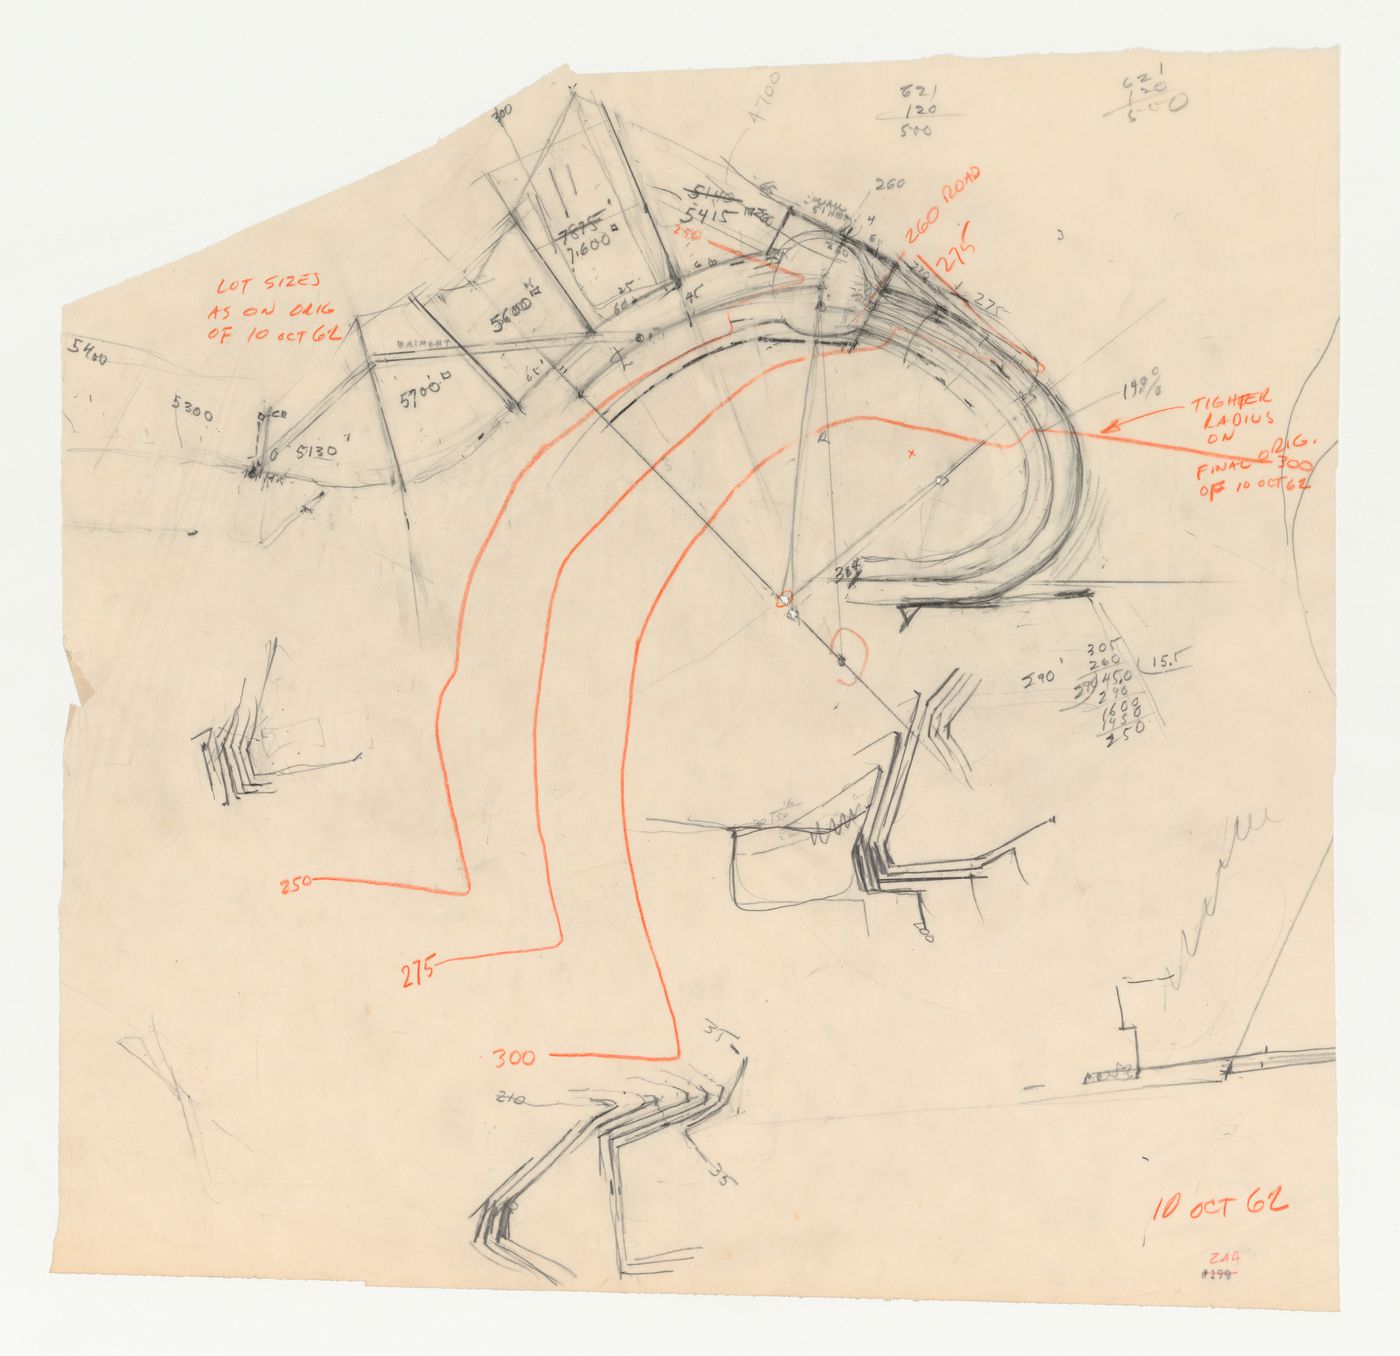 Swedenborg Memorial Chapel, El Cerrito, California: Partial site plan for the access road with grading sketches and sketch slope profile